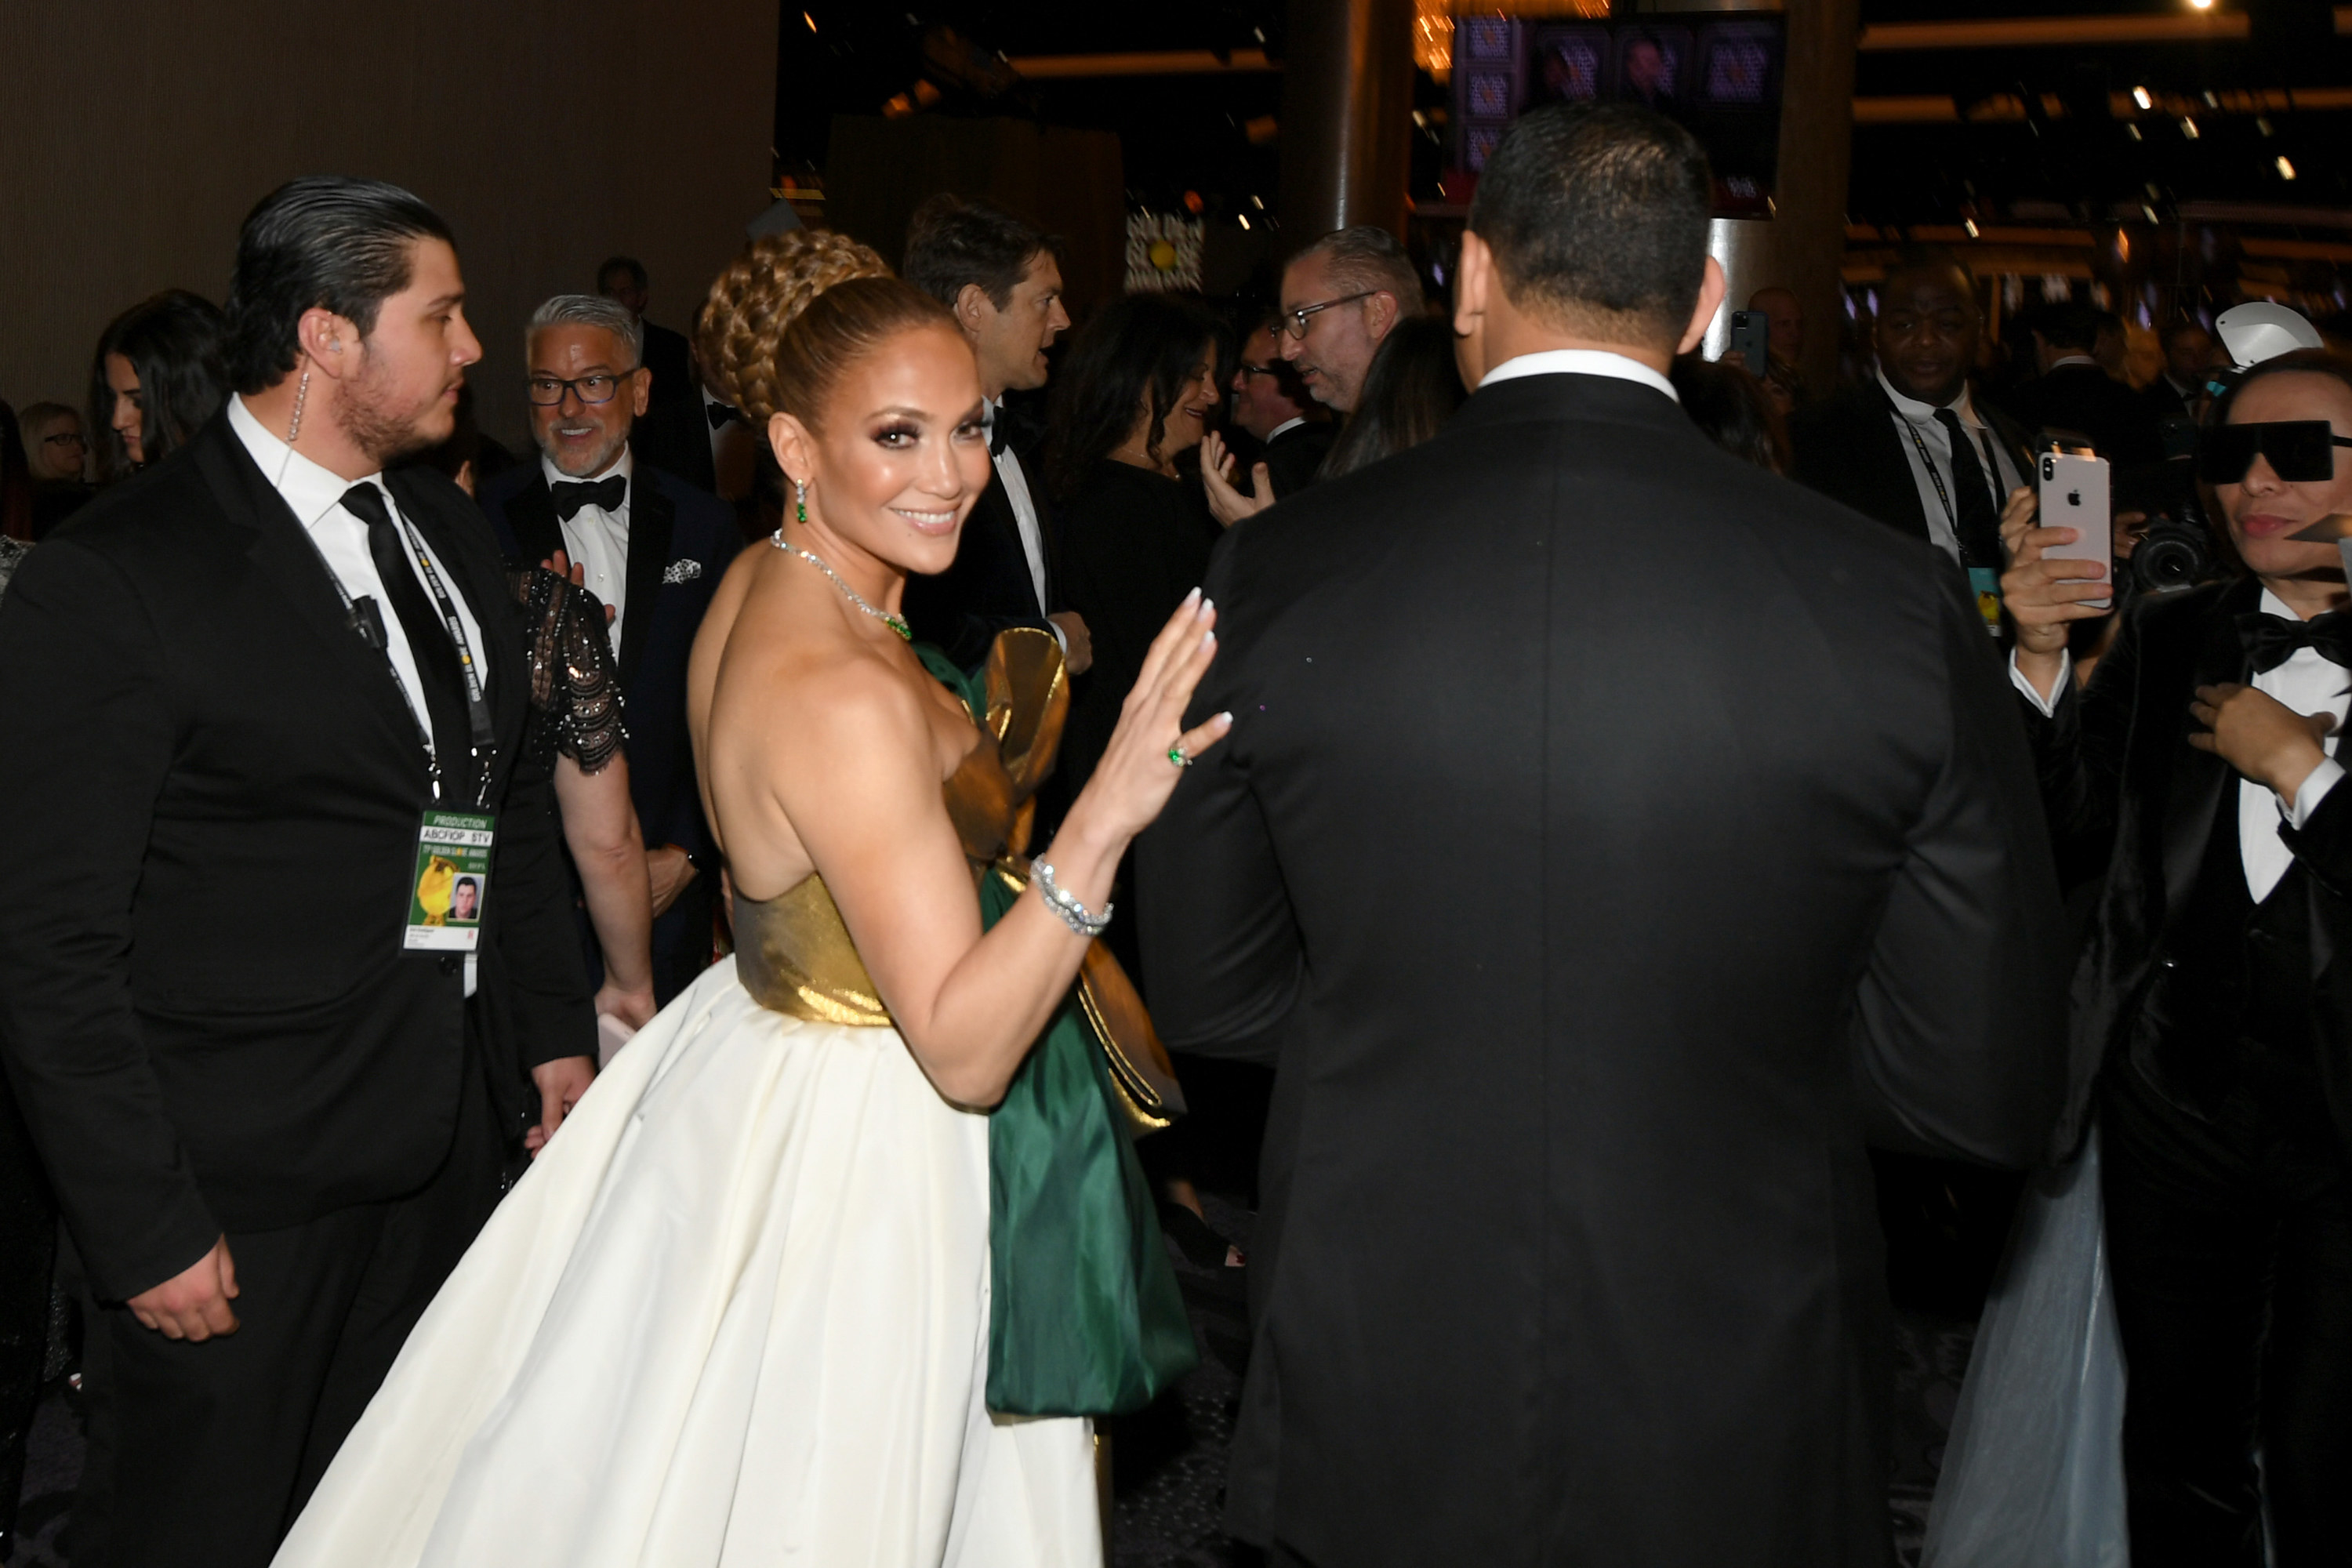 JLo at the Golden Globes after party.